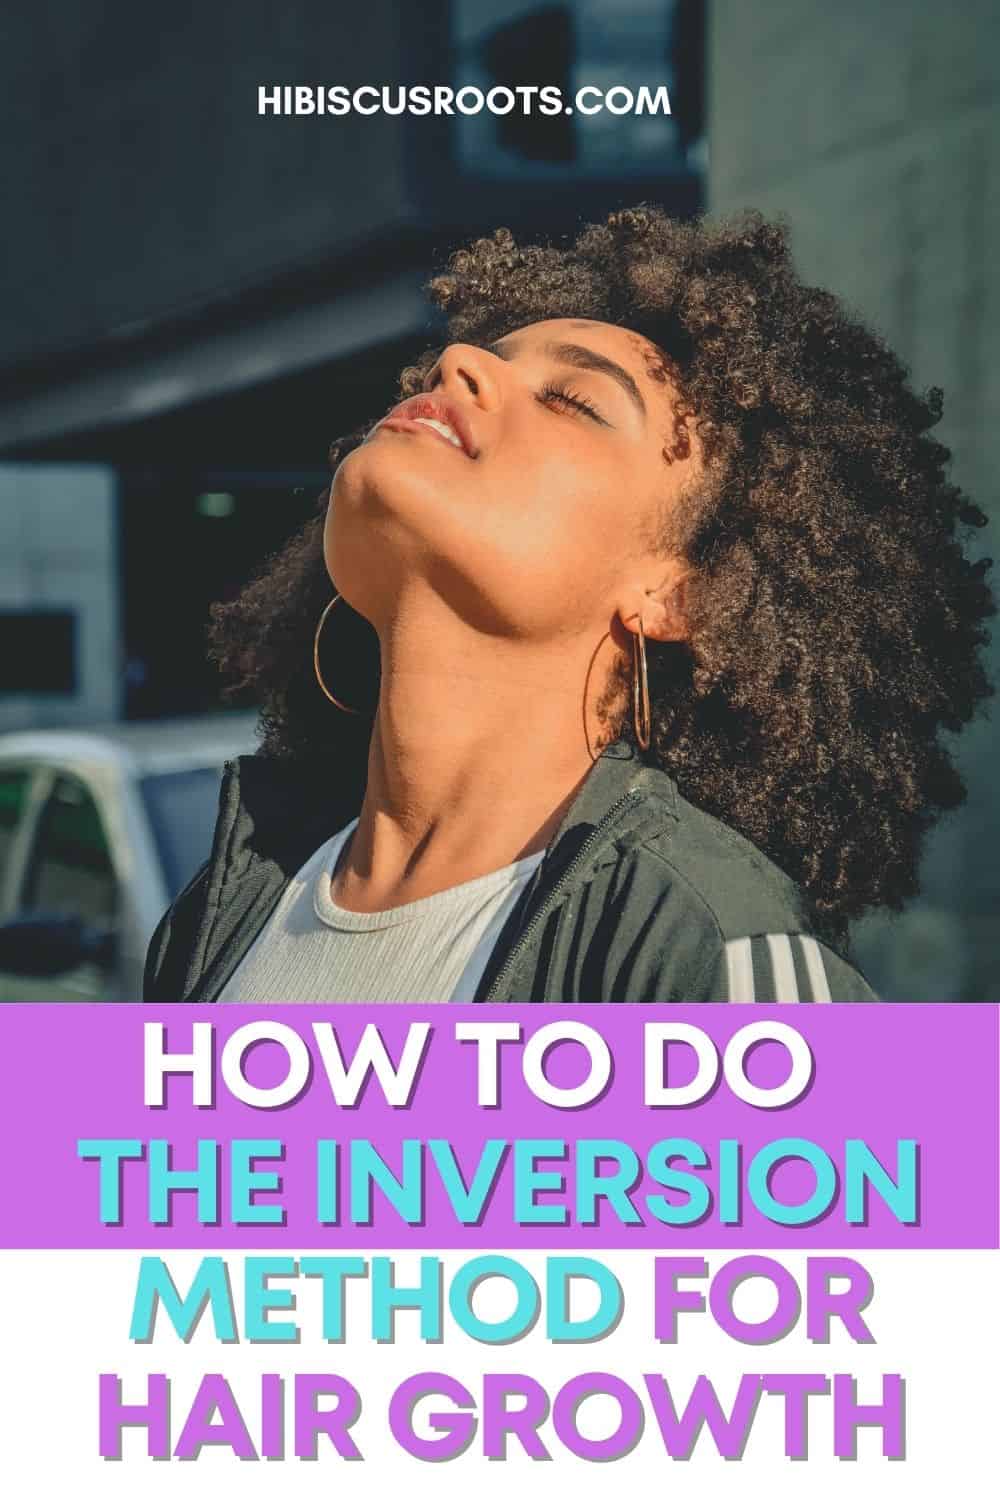 The Inversion Method for Hair Growth (Debunked!) | Hibiscus Roots